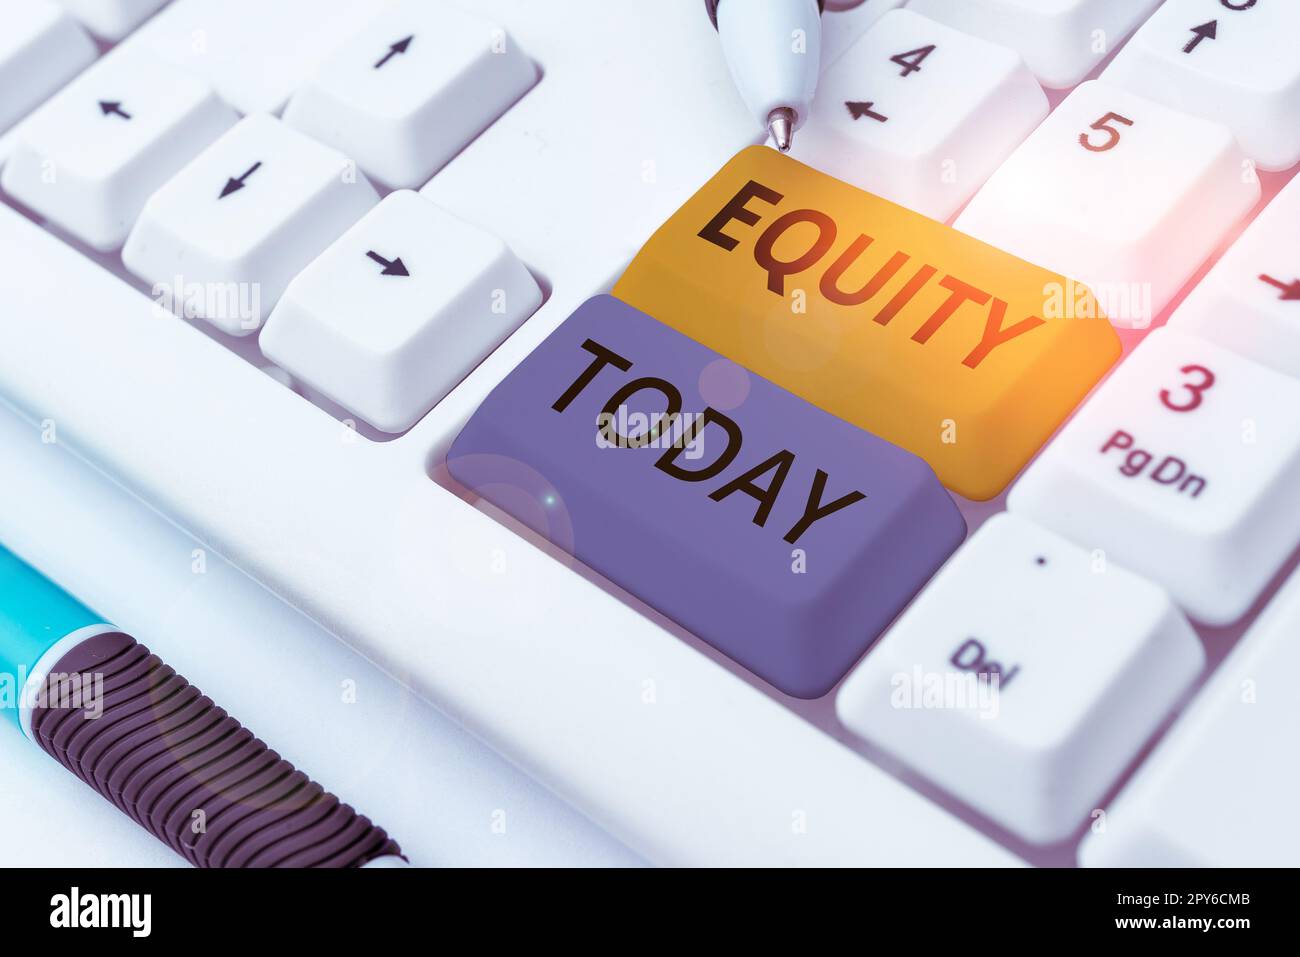 Sign displaying Equity. Word for quality of being fair and impartial race free One hand Unity Stock Photo